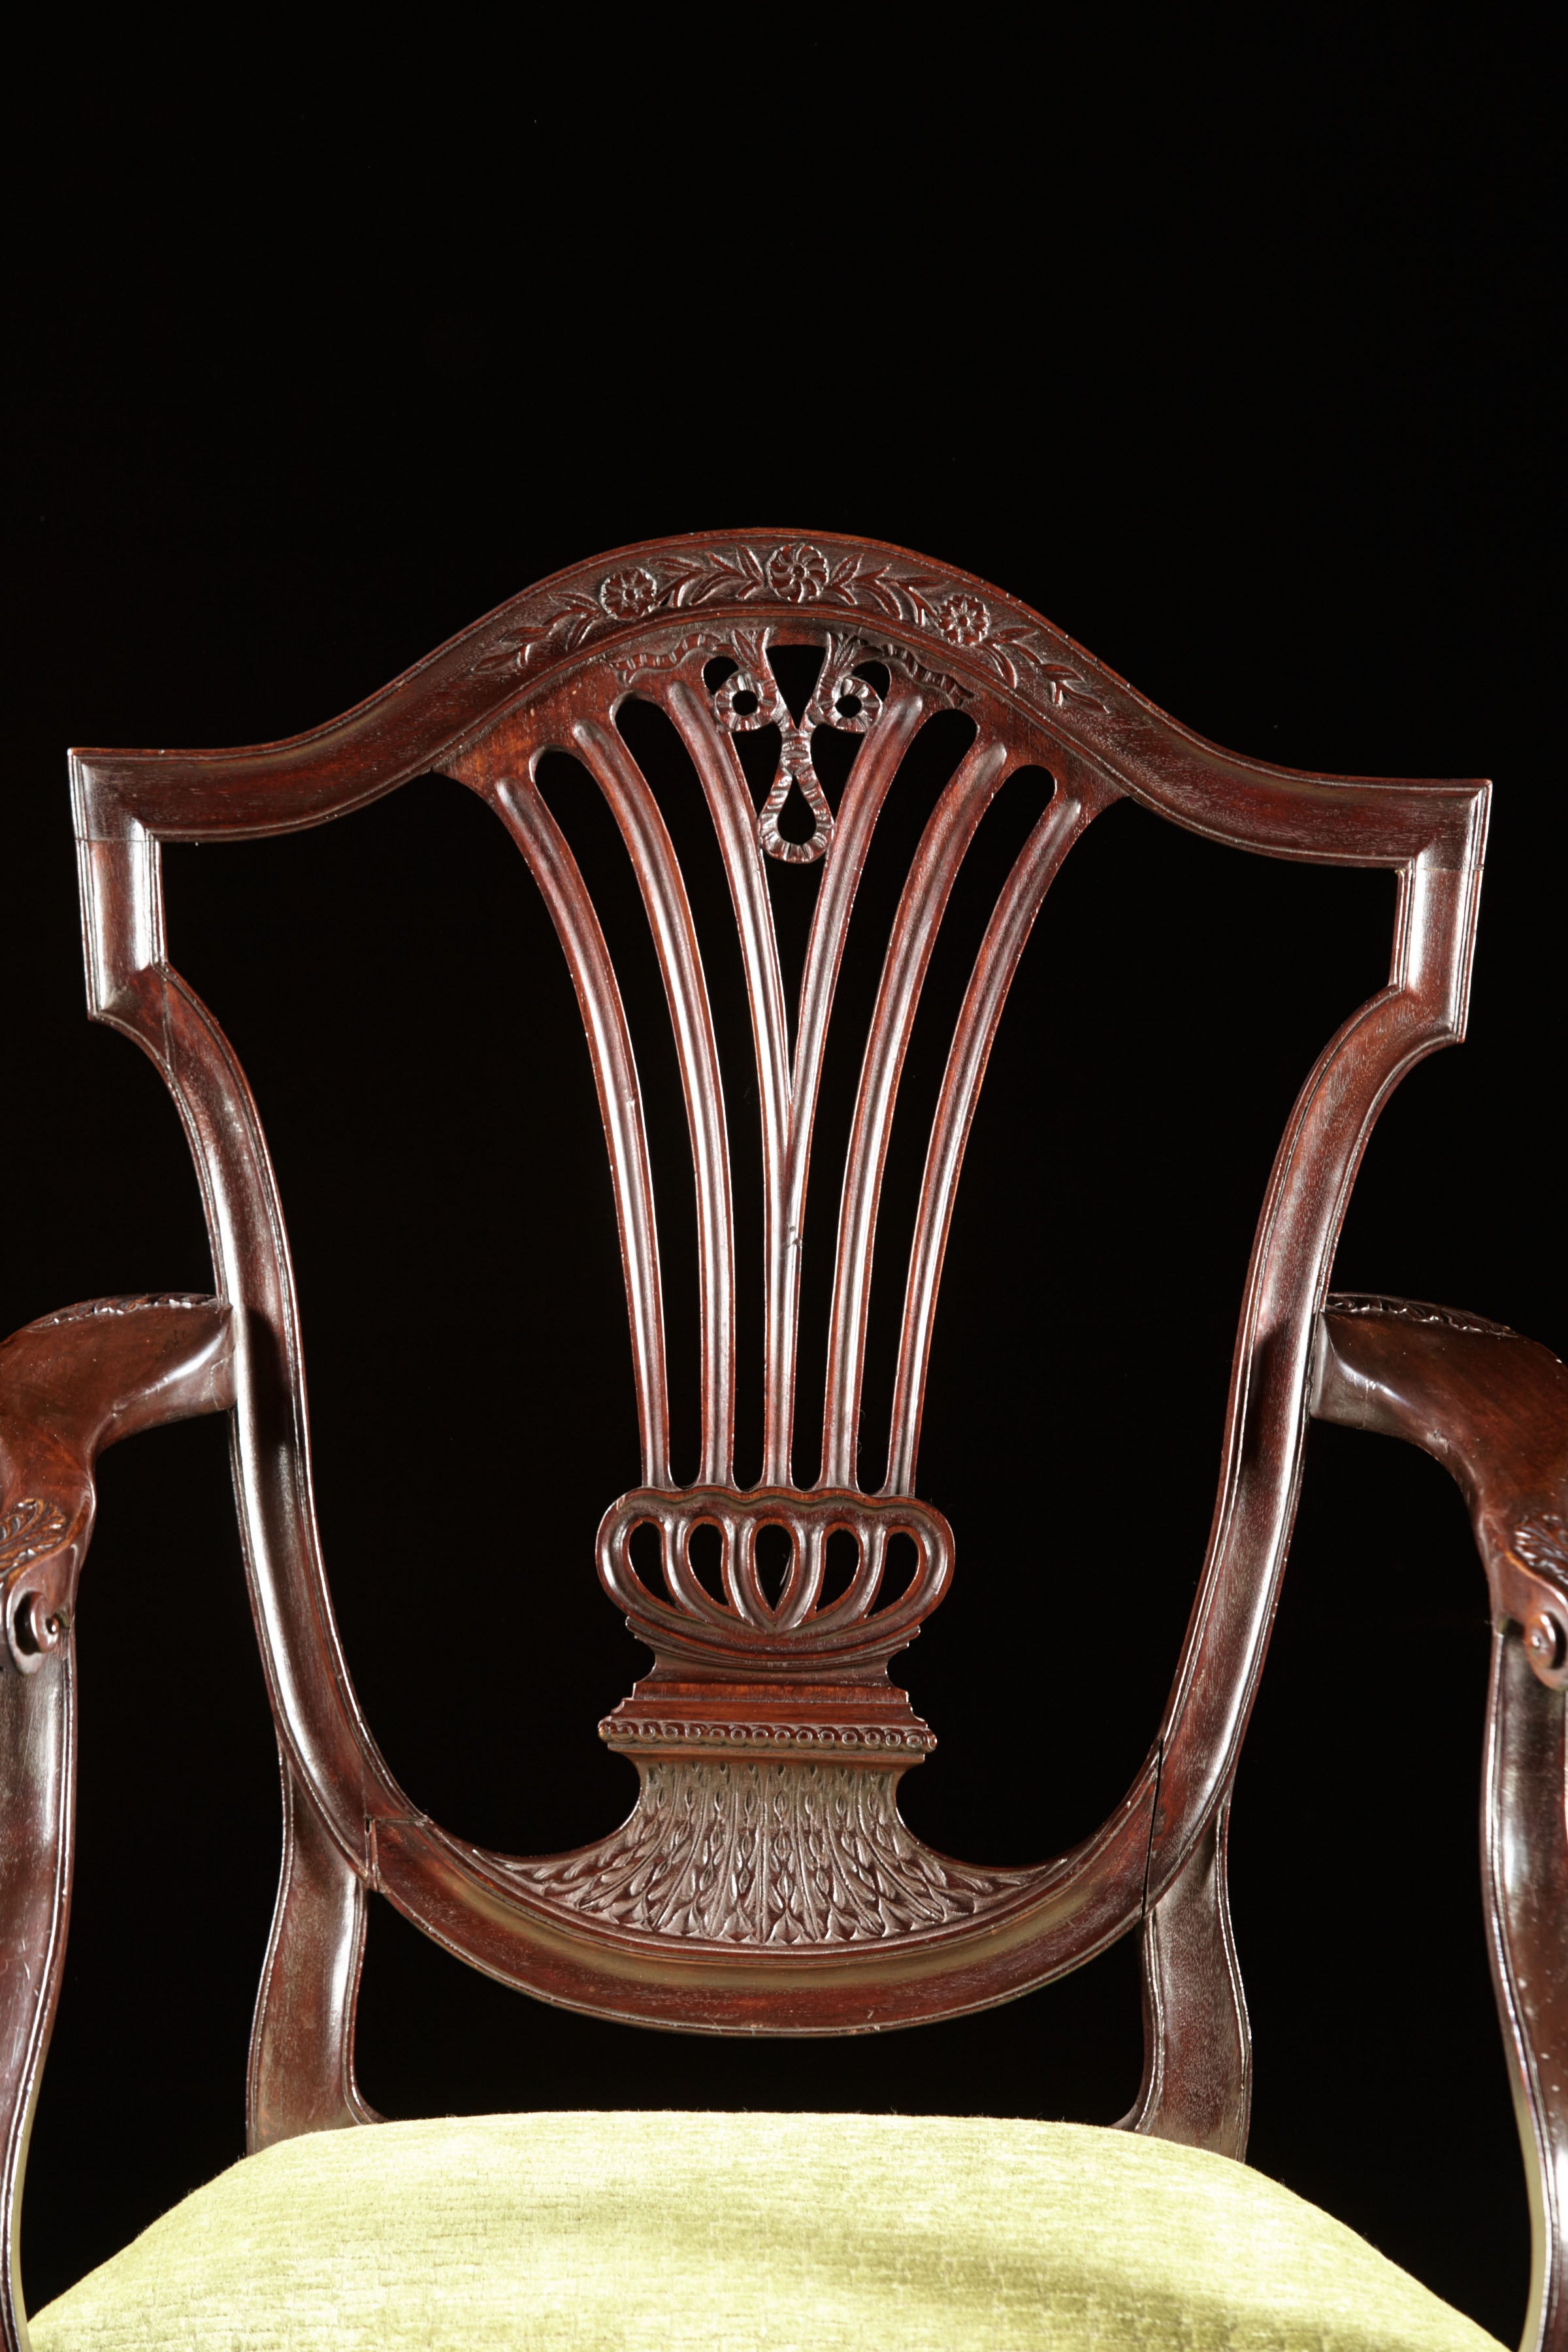 Rare and Unusual Large Scaled 18th Century Carved Mahogany Armchair For Sale